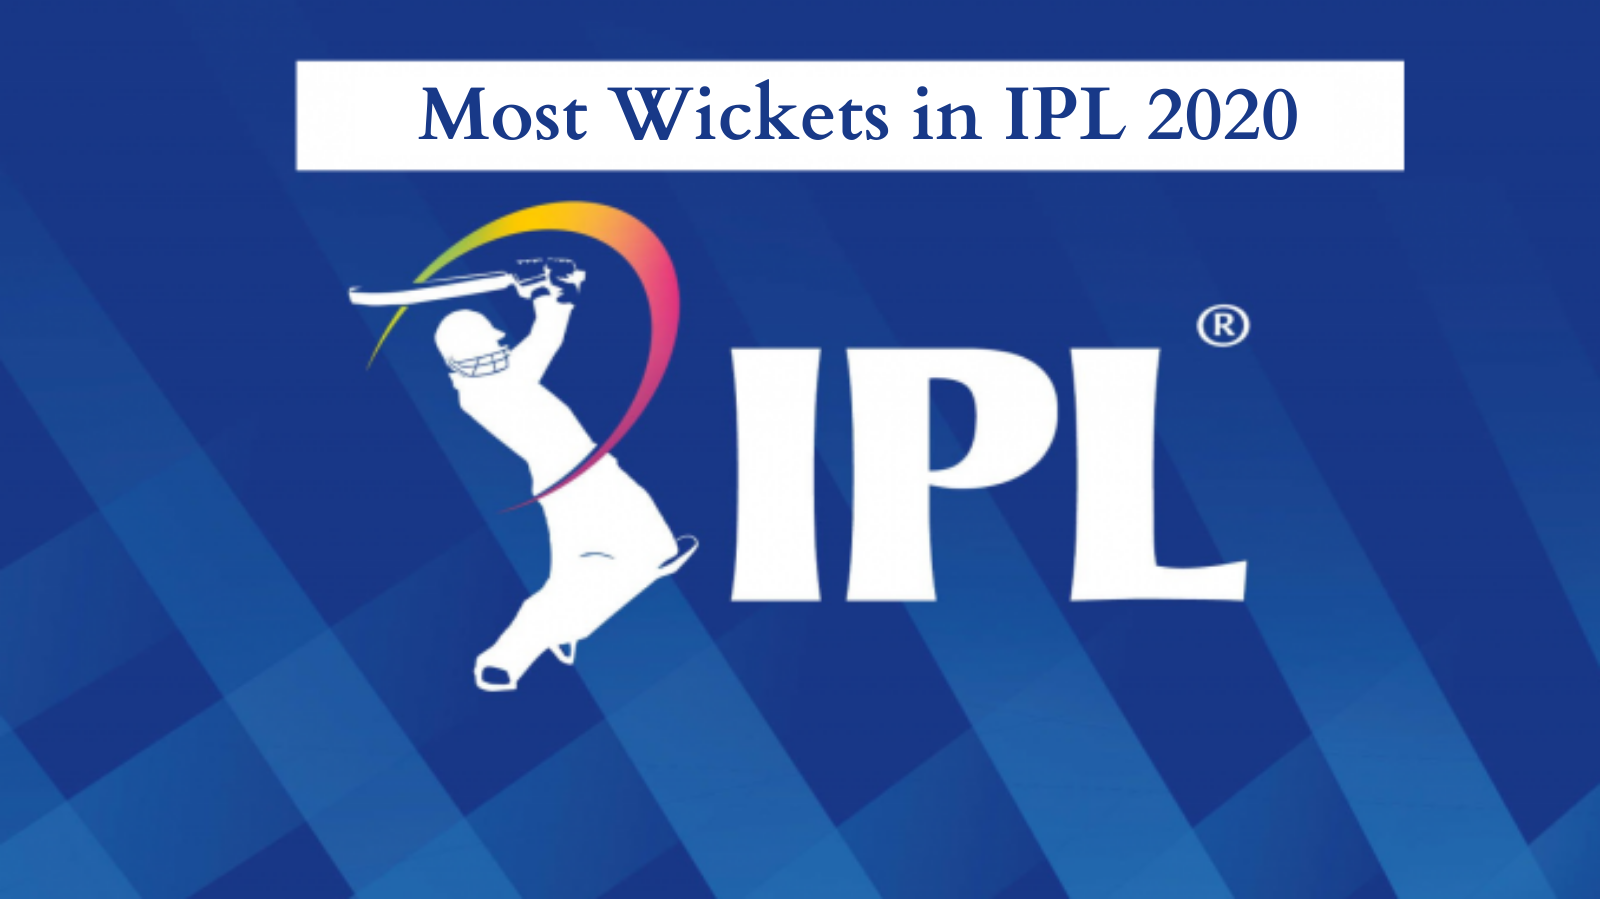 Most Wickets in IPL 2020